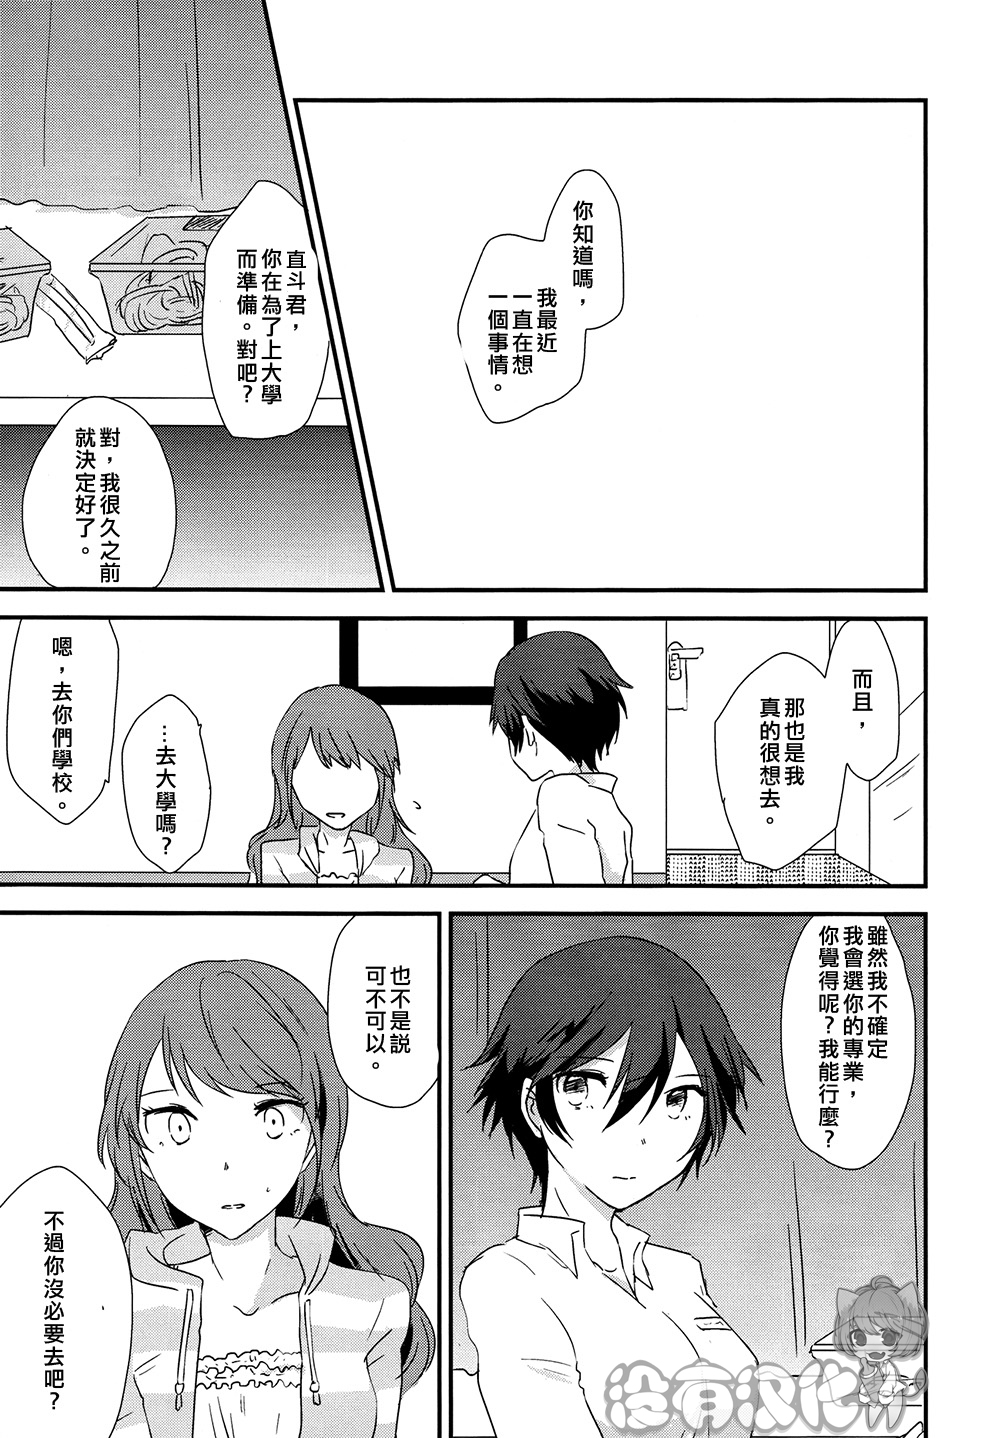 (C88) [MEGANE81 (Shinocco)] Eighteen Emotion (Persona 4) [Chinese] [沒有漢化] page 7 full